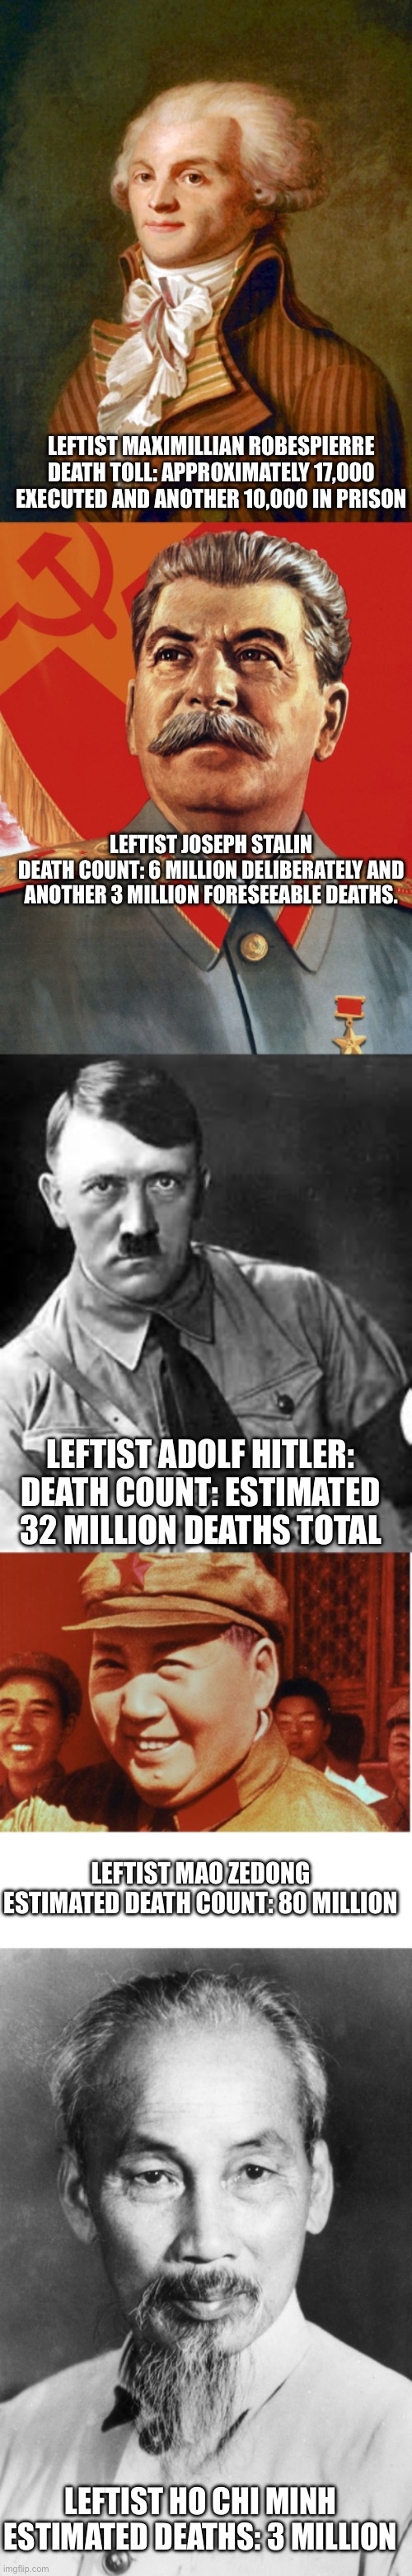 Everywhere Leftists hold power they spread violence and death | LEFTIST MAXIMILLIAN ROBESPIERRE
DEATH TOLL: APPROXIMATELY 17,000 EXECUTED AND ANOTHER 10,000 IN PRISON; LEFTIST JOSEPH STALIN
DEATH COUNT: 6 MILLION DELIBERATELY AND ANOTHER 3 MILLION FORESEEABLE DEATHS. LEFTIST ADOLF HITLER:
DEATH COUNT: ESTIMATED 32 MILLION DEATHS TOTAL; LEFTIST MAO ZEDONG
ESTIMATED DEATH COUNT: 80 MILLION; LEFTIST HO CHI MINH
ESTIMATED DEATHS: 3 MILLION | image tagged in robespierre,joseph stalin,adolf hitler,mao ze dong,ho chi minh | made w/ Imgflip meme maker